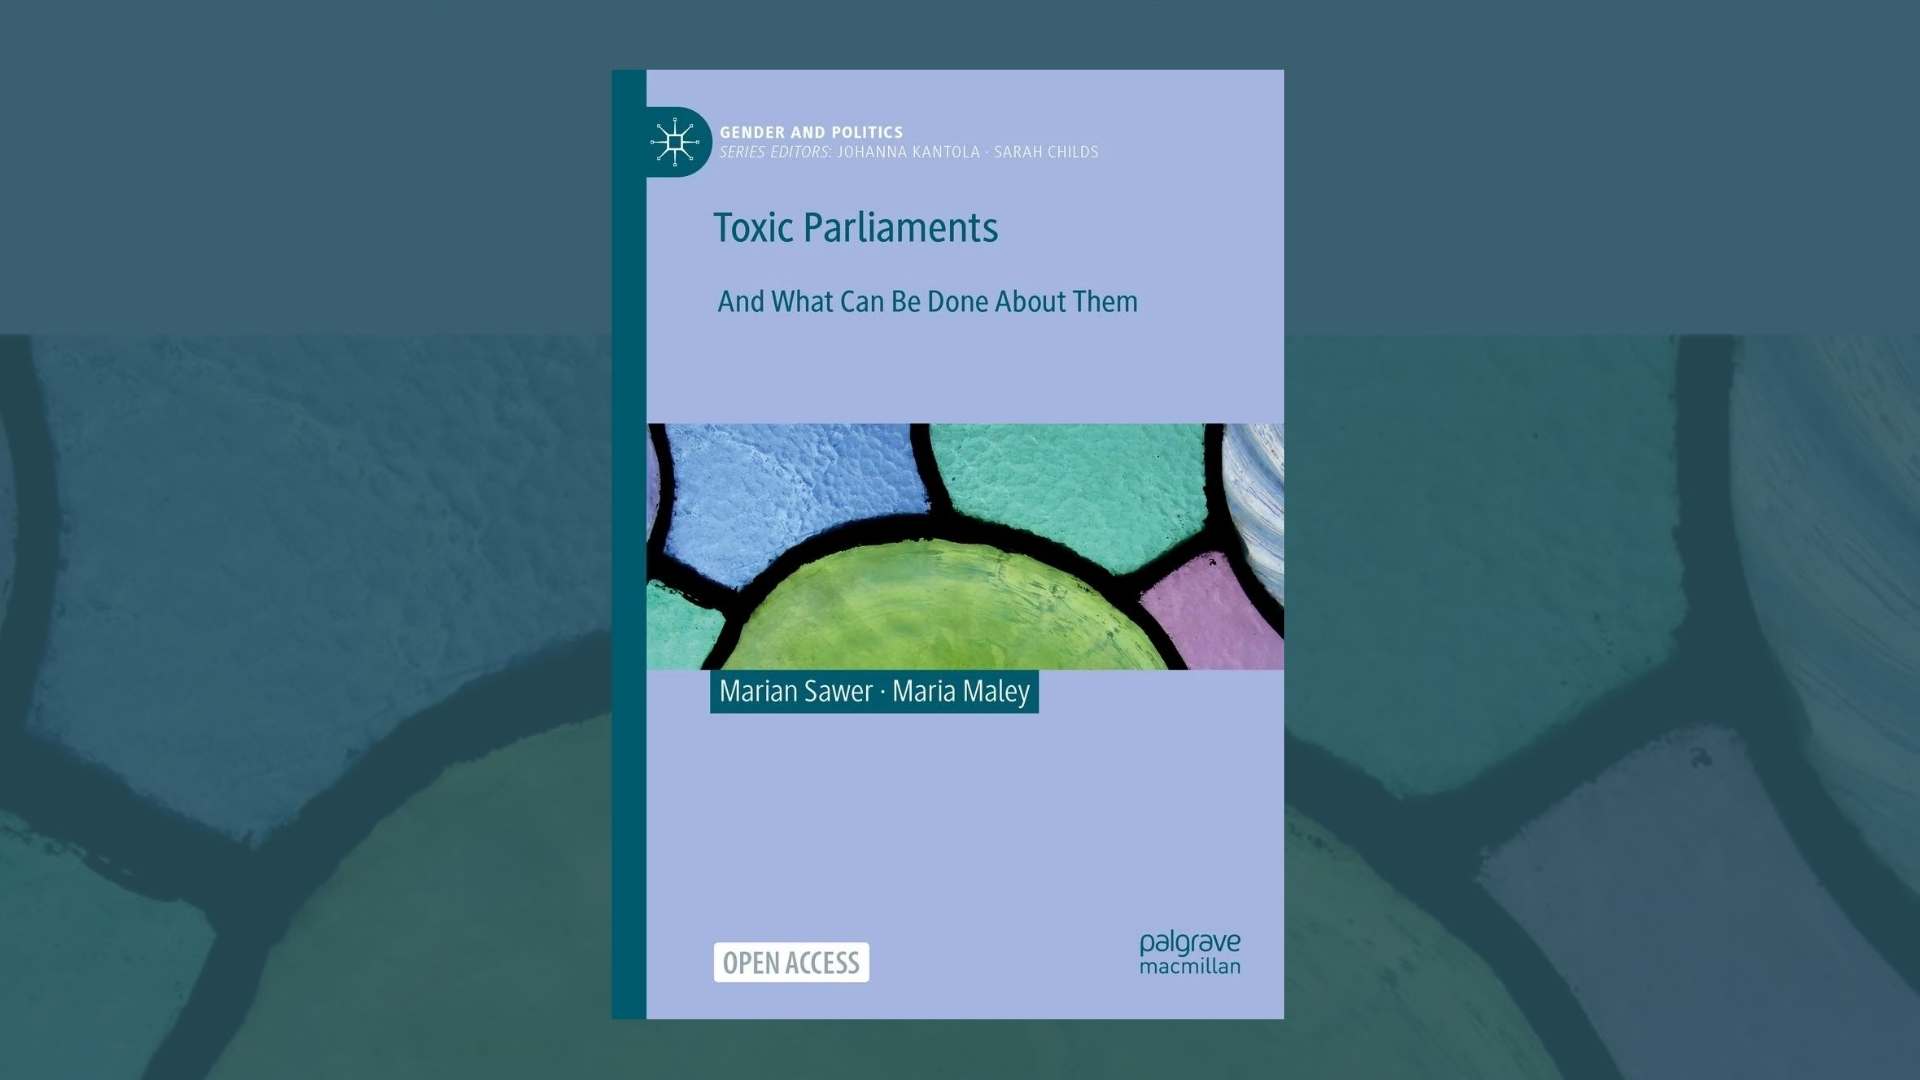 Cover of the book Toxic Parliaments, a light purple book with abstract coloured graphic in the centre, against a blue background